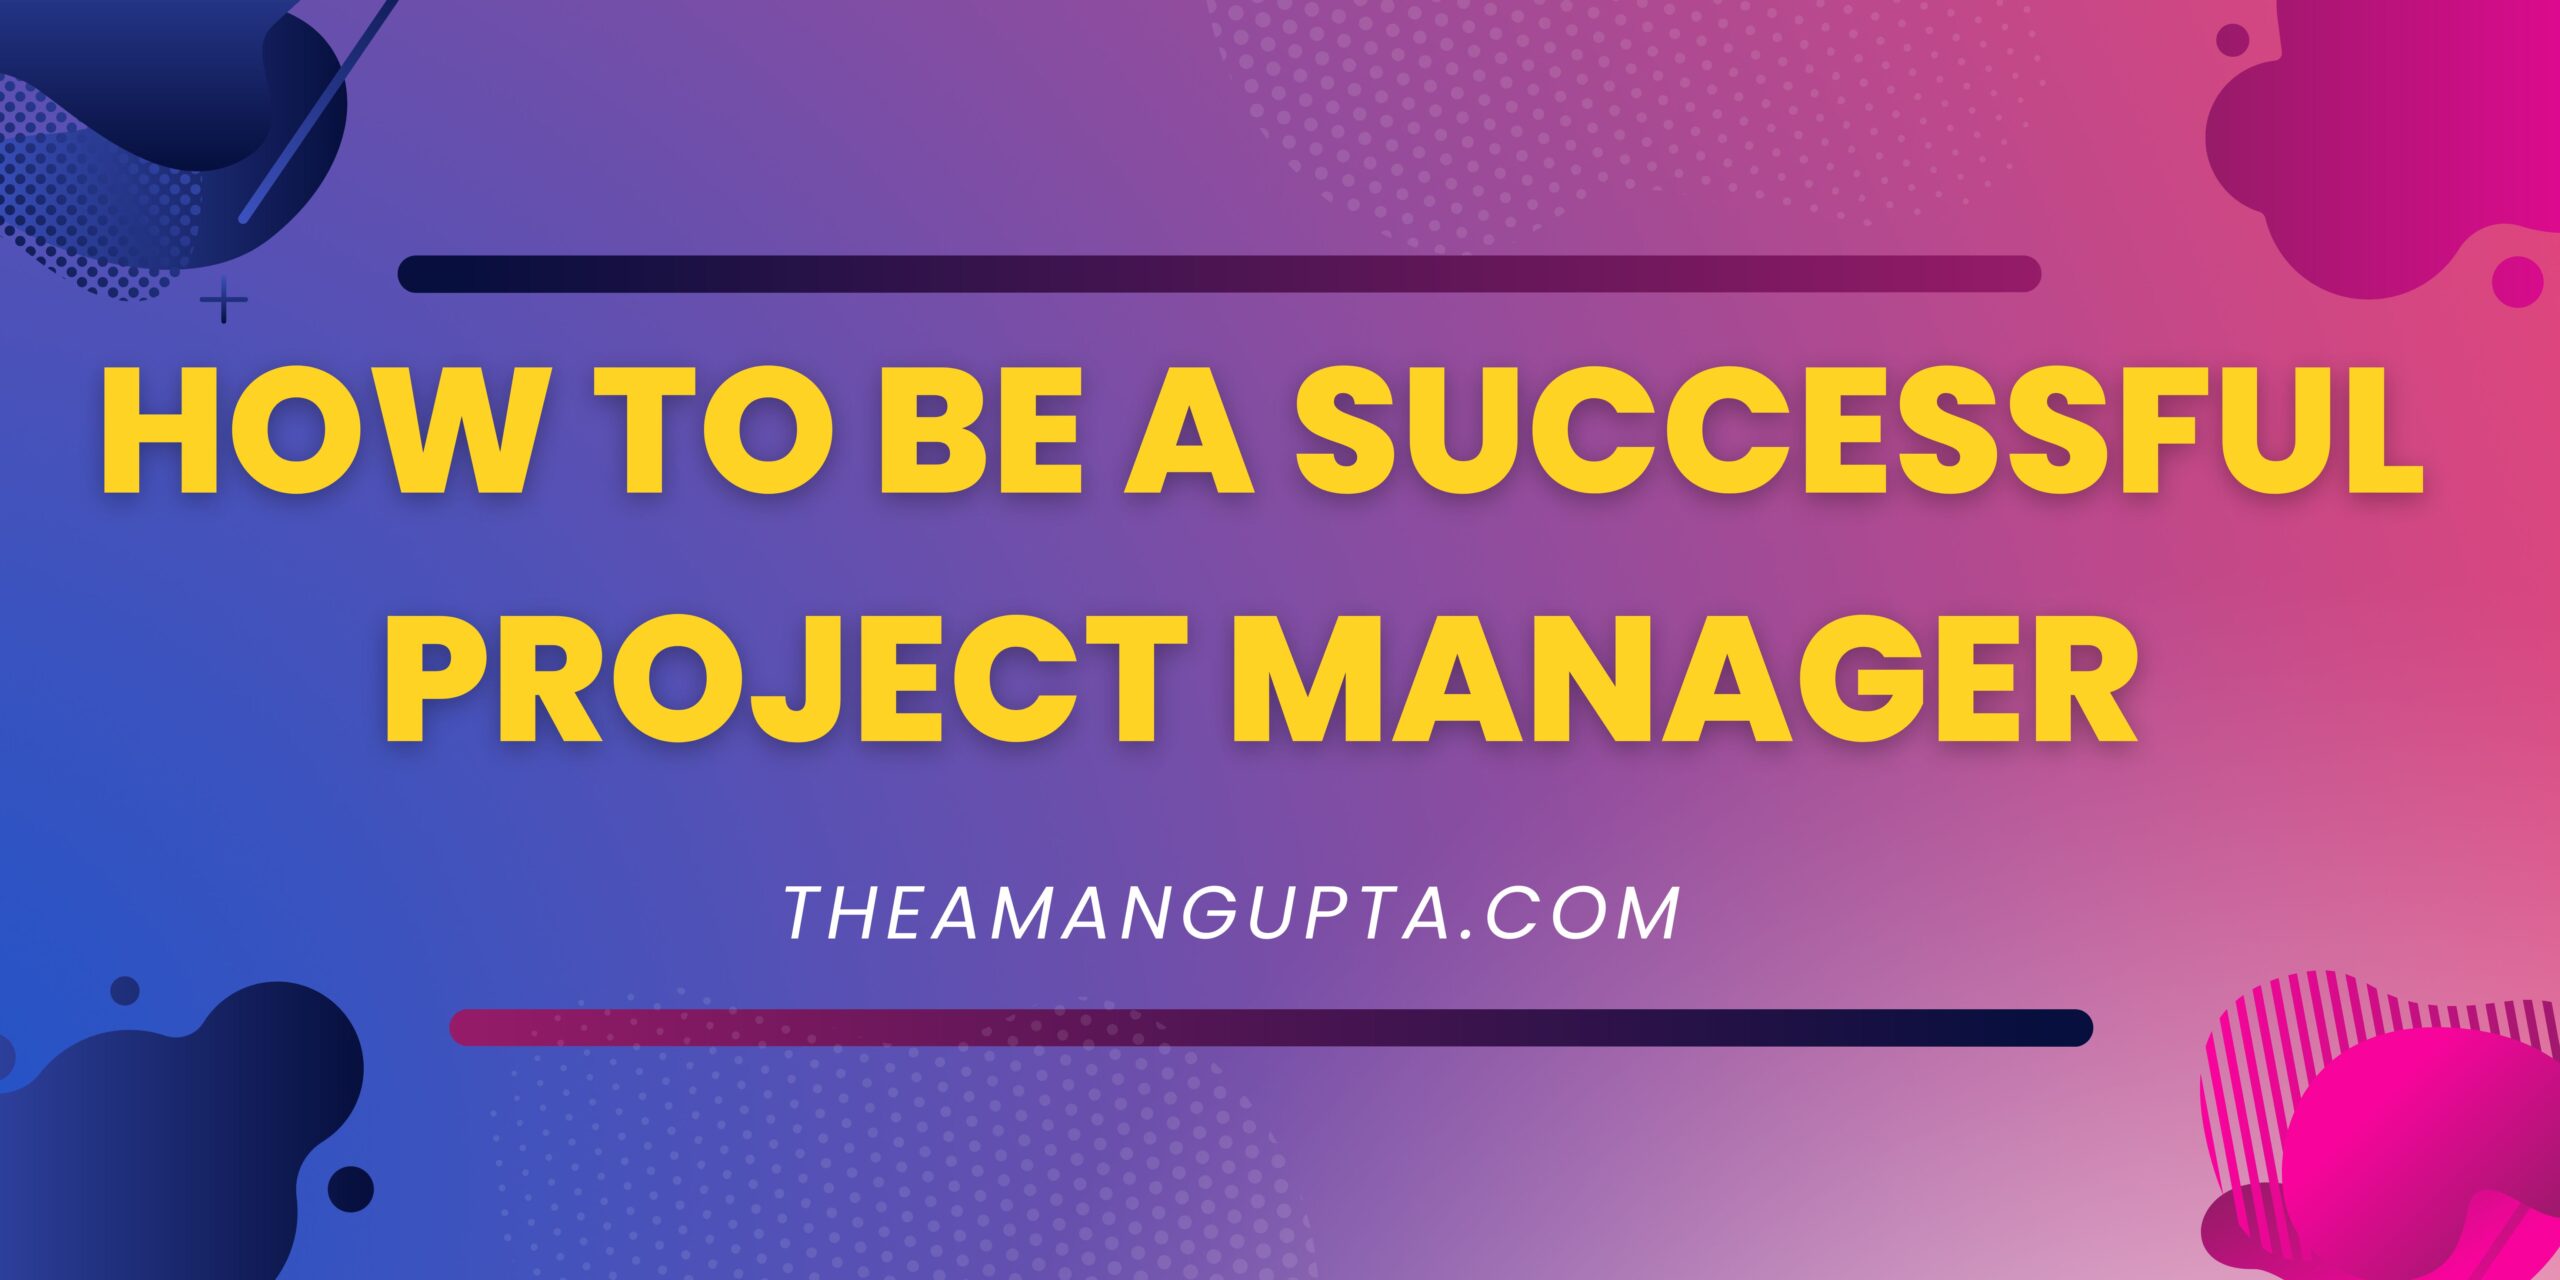 How To Be A Successful Project Manager|How To Be A Successful Project Manager|Theamangupta|Theamangupta